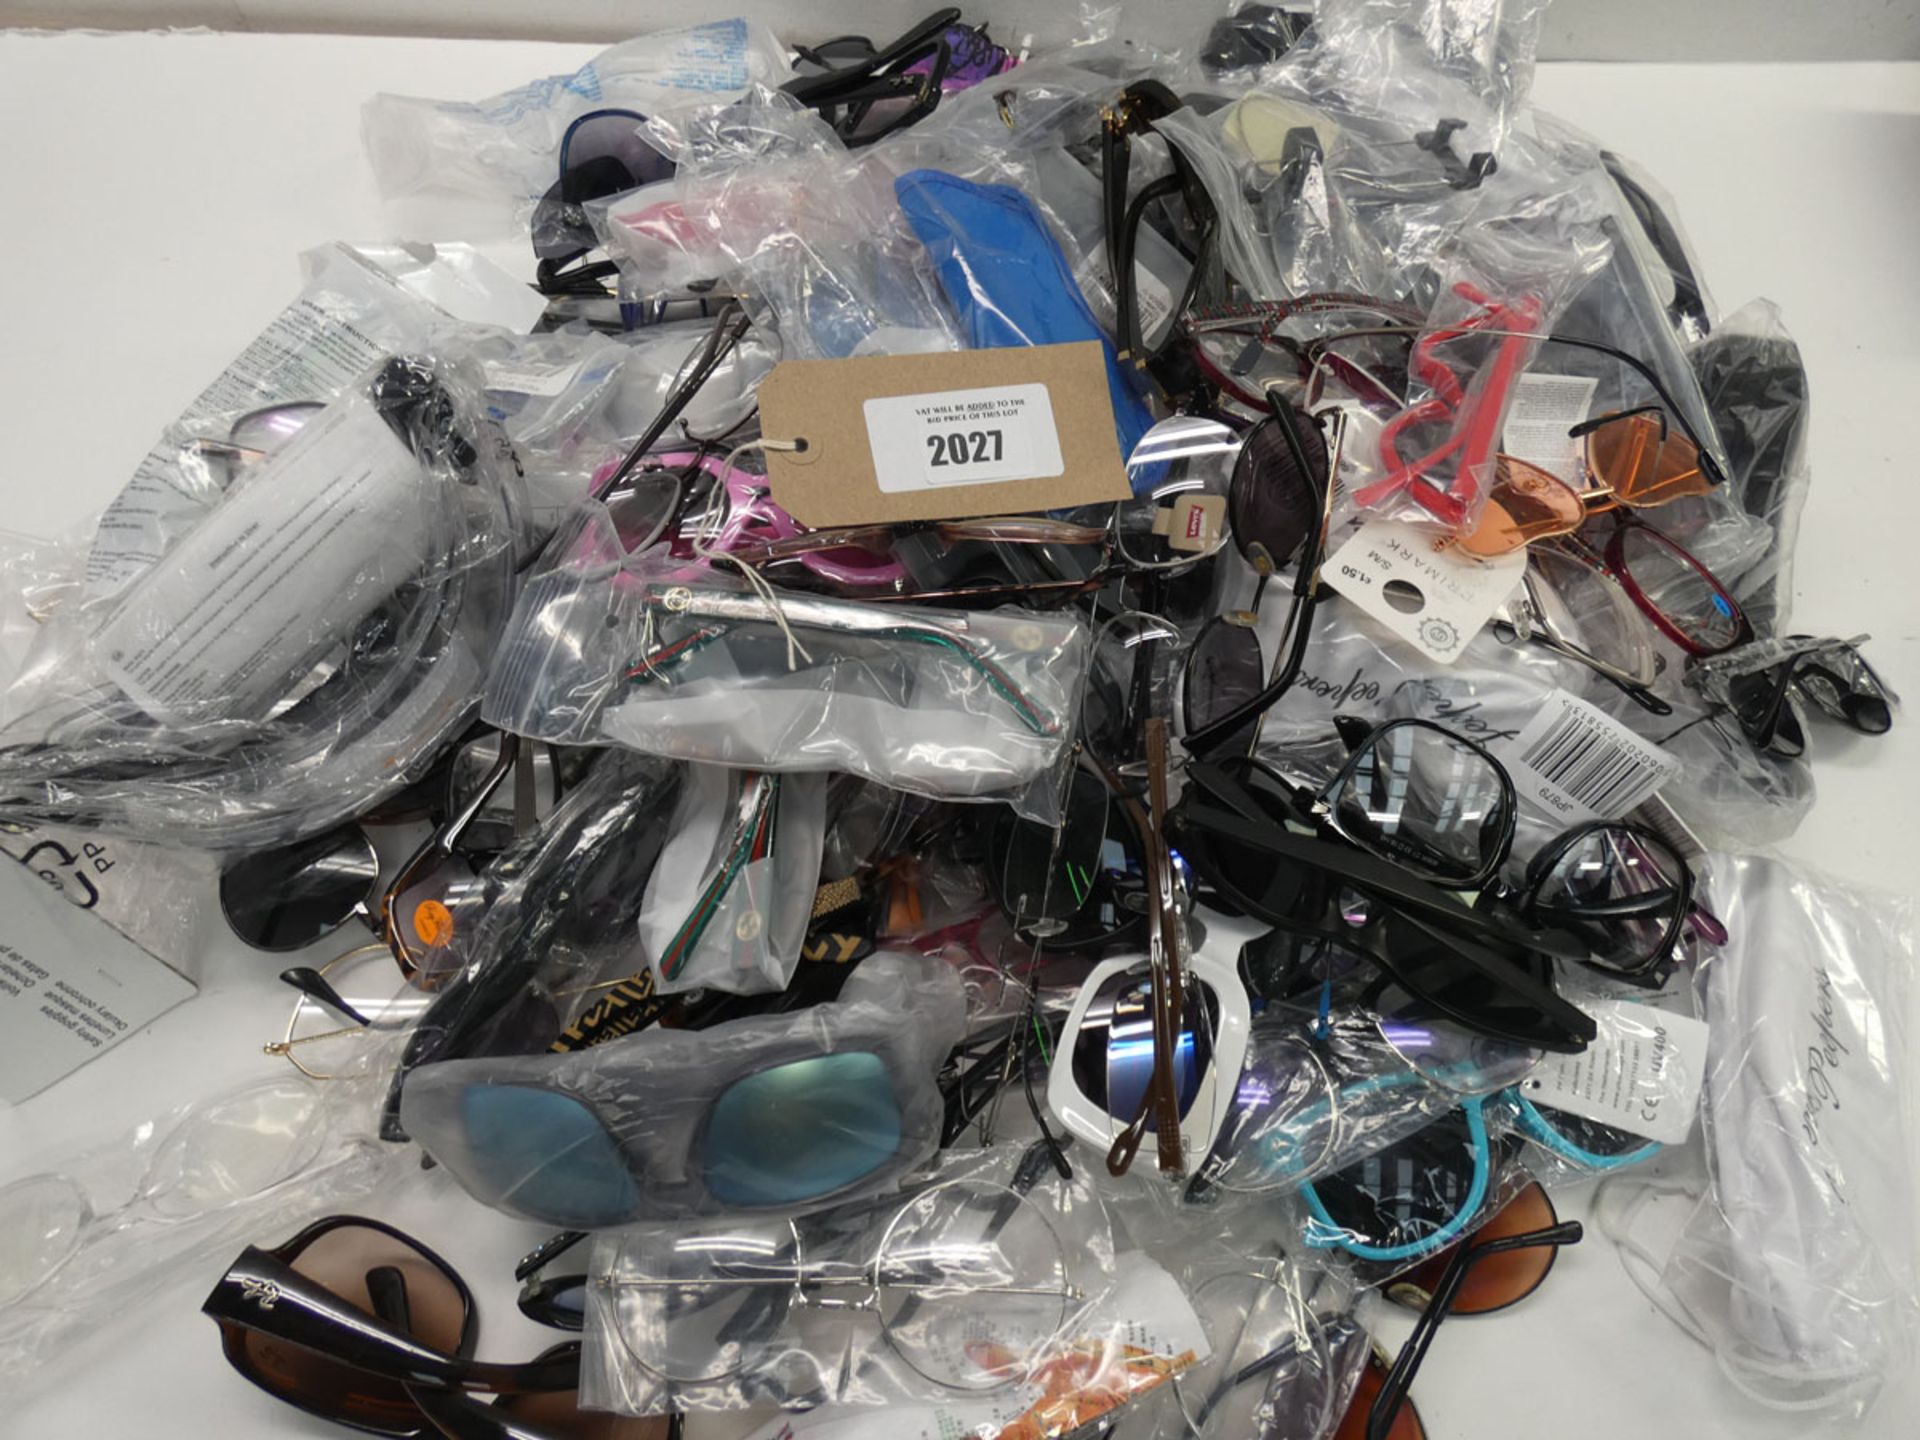 Bag containing quantity of loose sunglasses and reading glasses